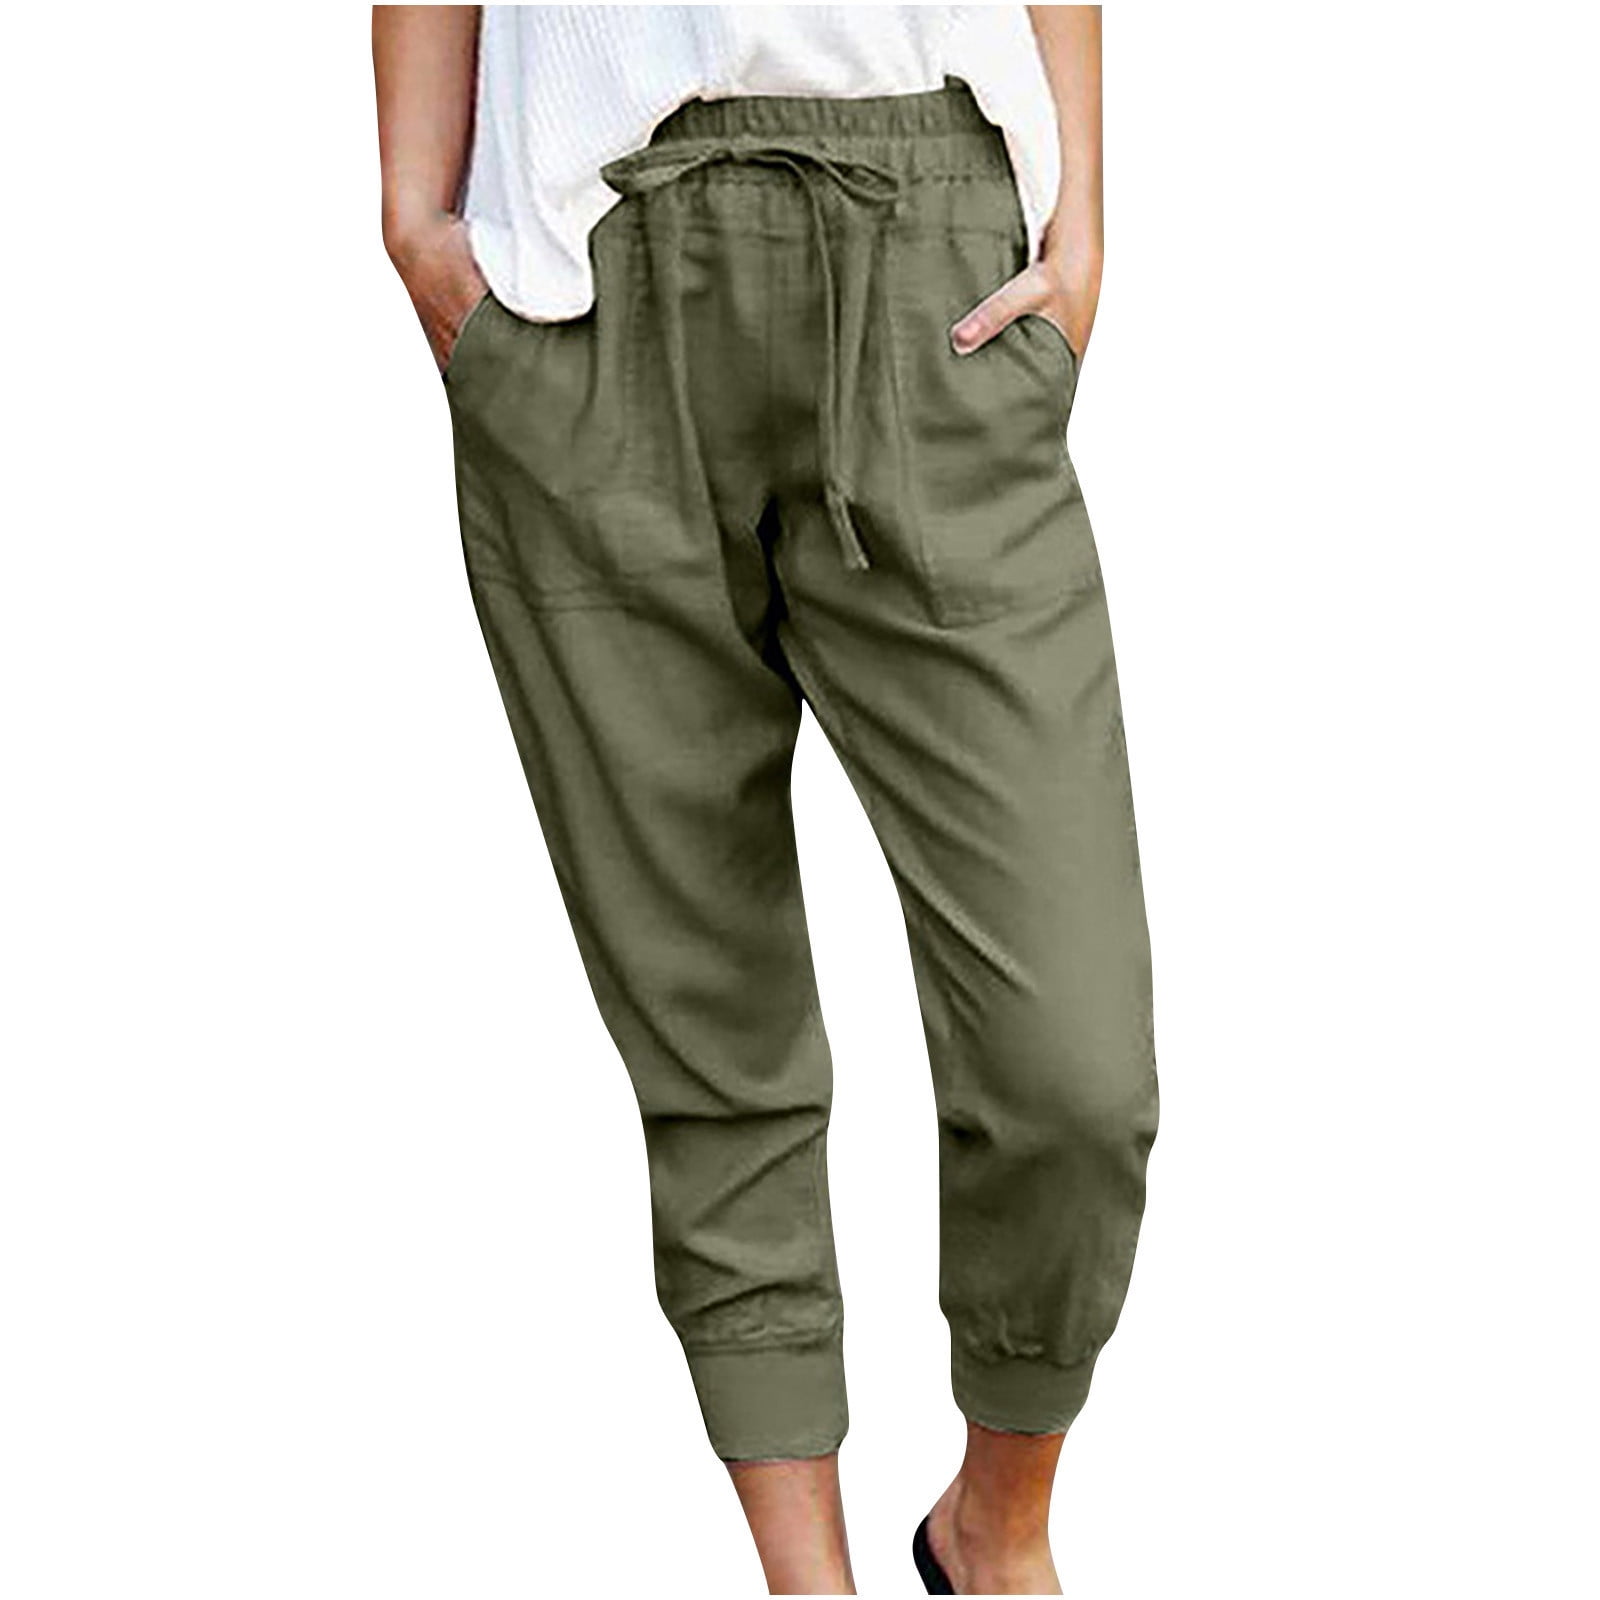 VSSSJ Women's Cropped Pants Regular Fit Drawstring Solid Color Elastic  Waist Calf-Length Pants Casual Loose Lightweight Breathable Trousers Army  Green